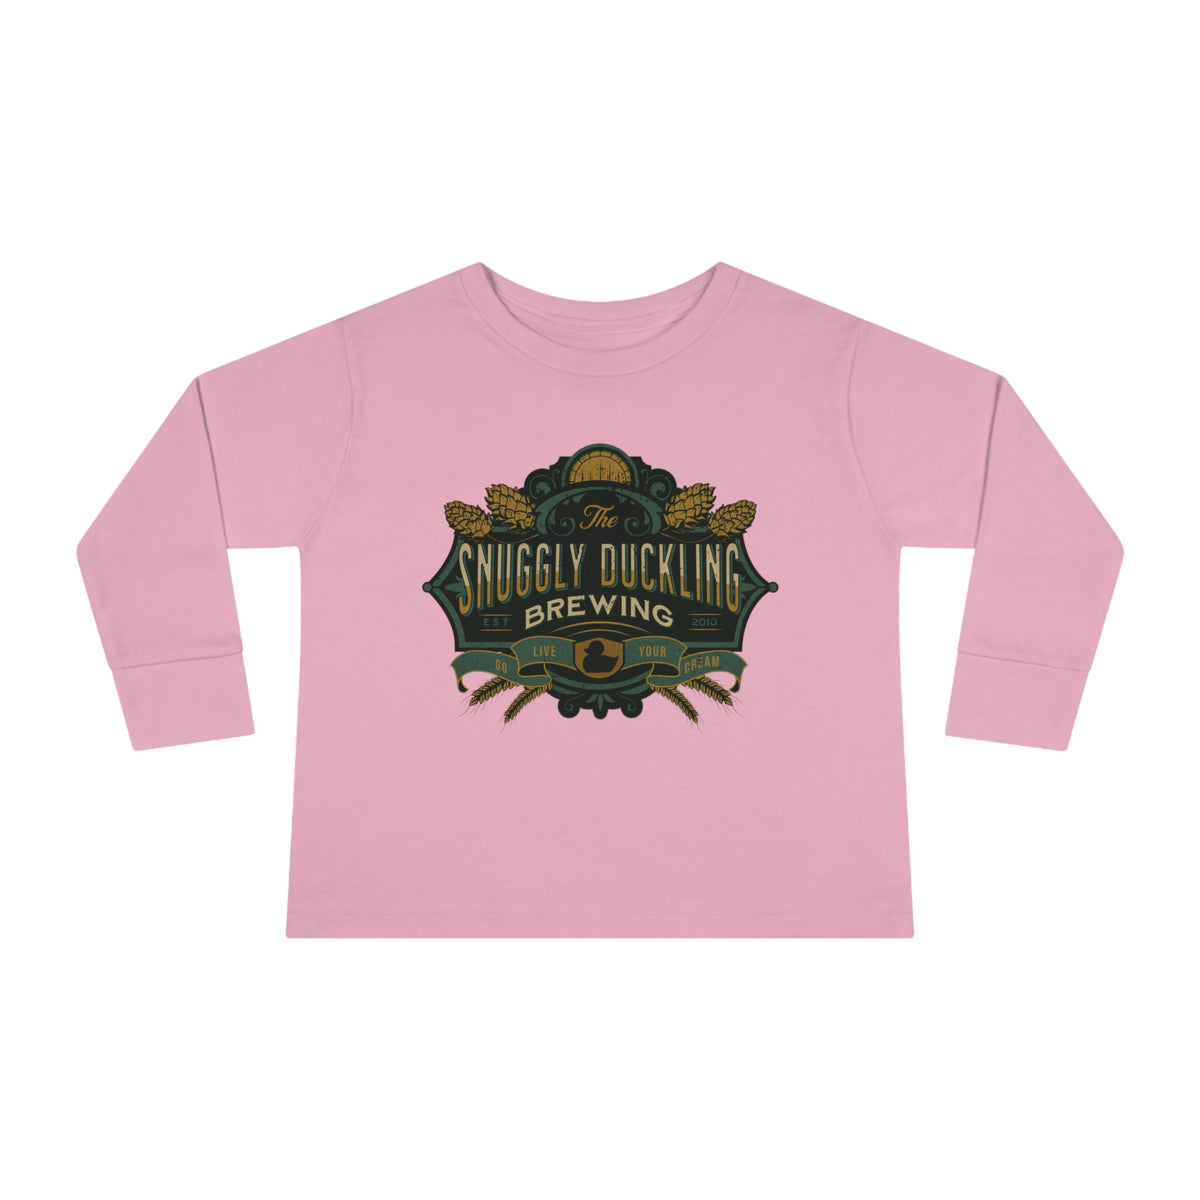 The Snuggly Duckling Brewing Rabbit Skins Toddler Long Sleeve Tee